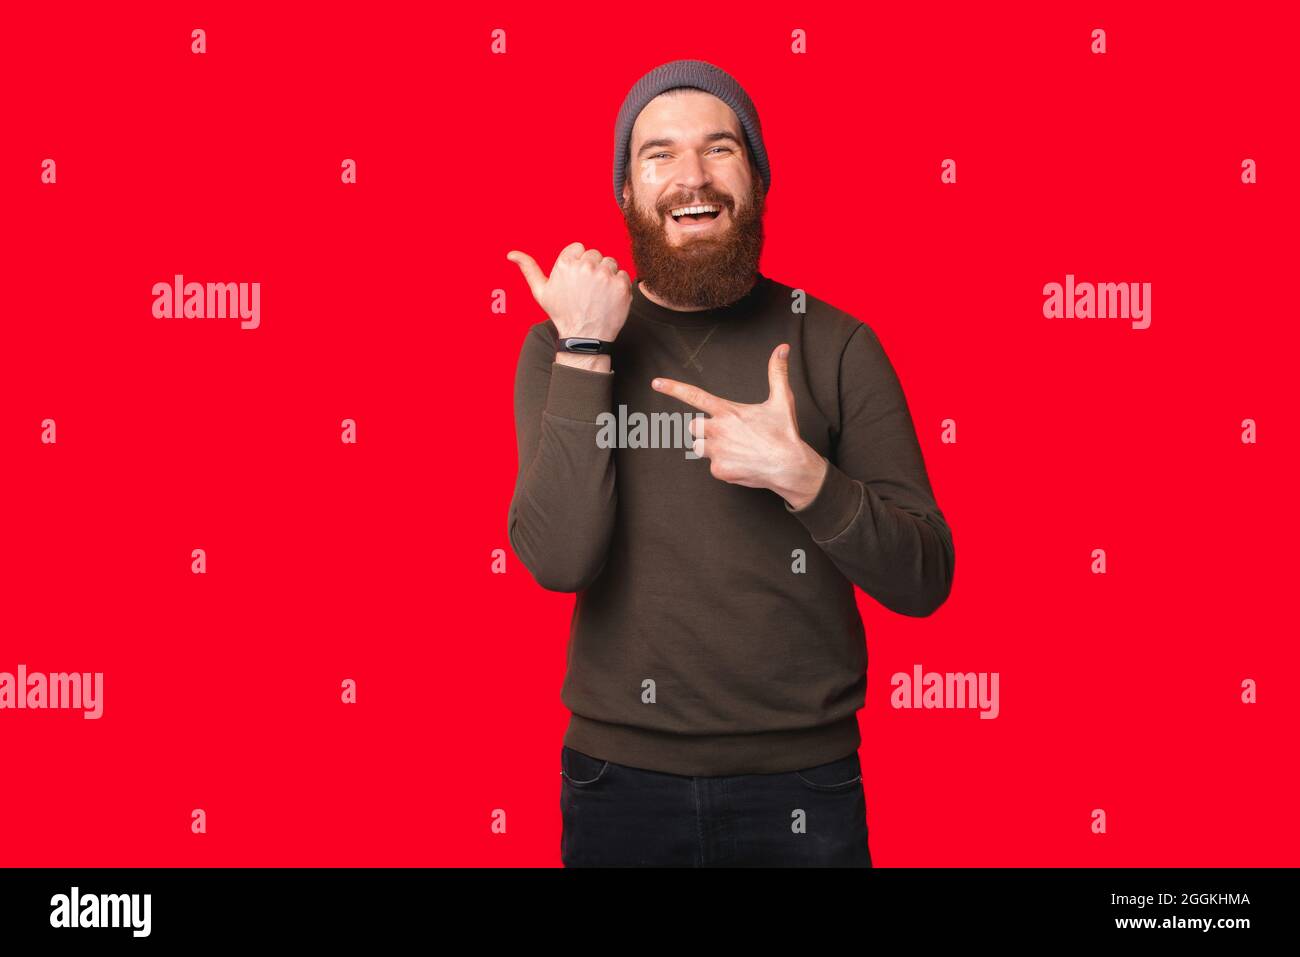 Bearded man wearing warm hat and sweater is pointing at his wrist watch over red background. Stock Photo